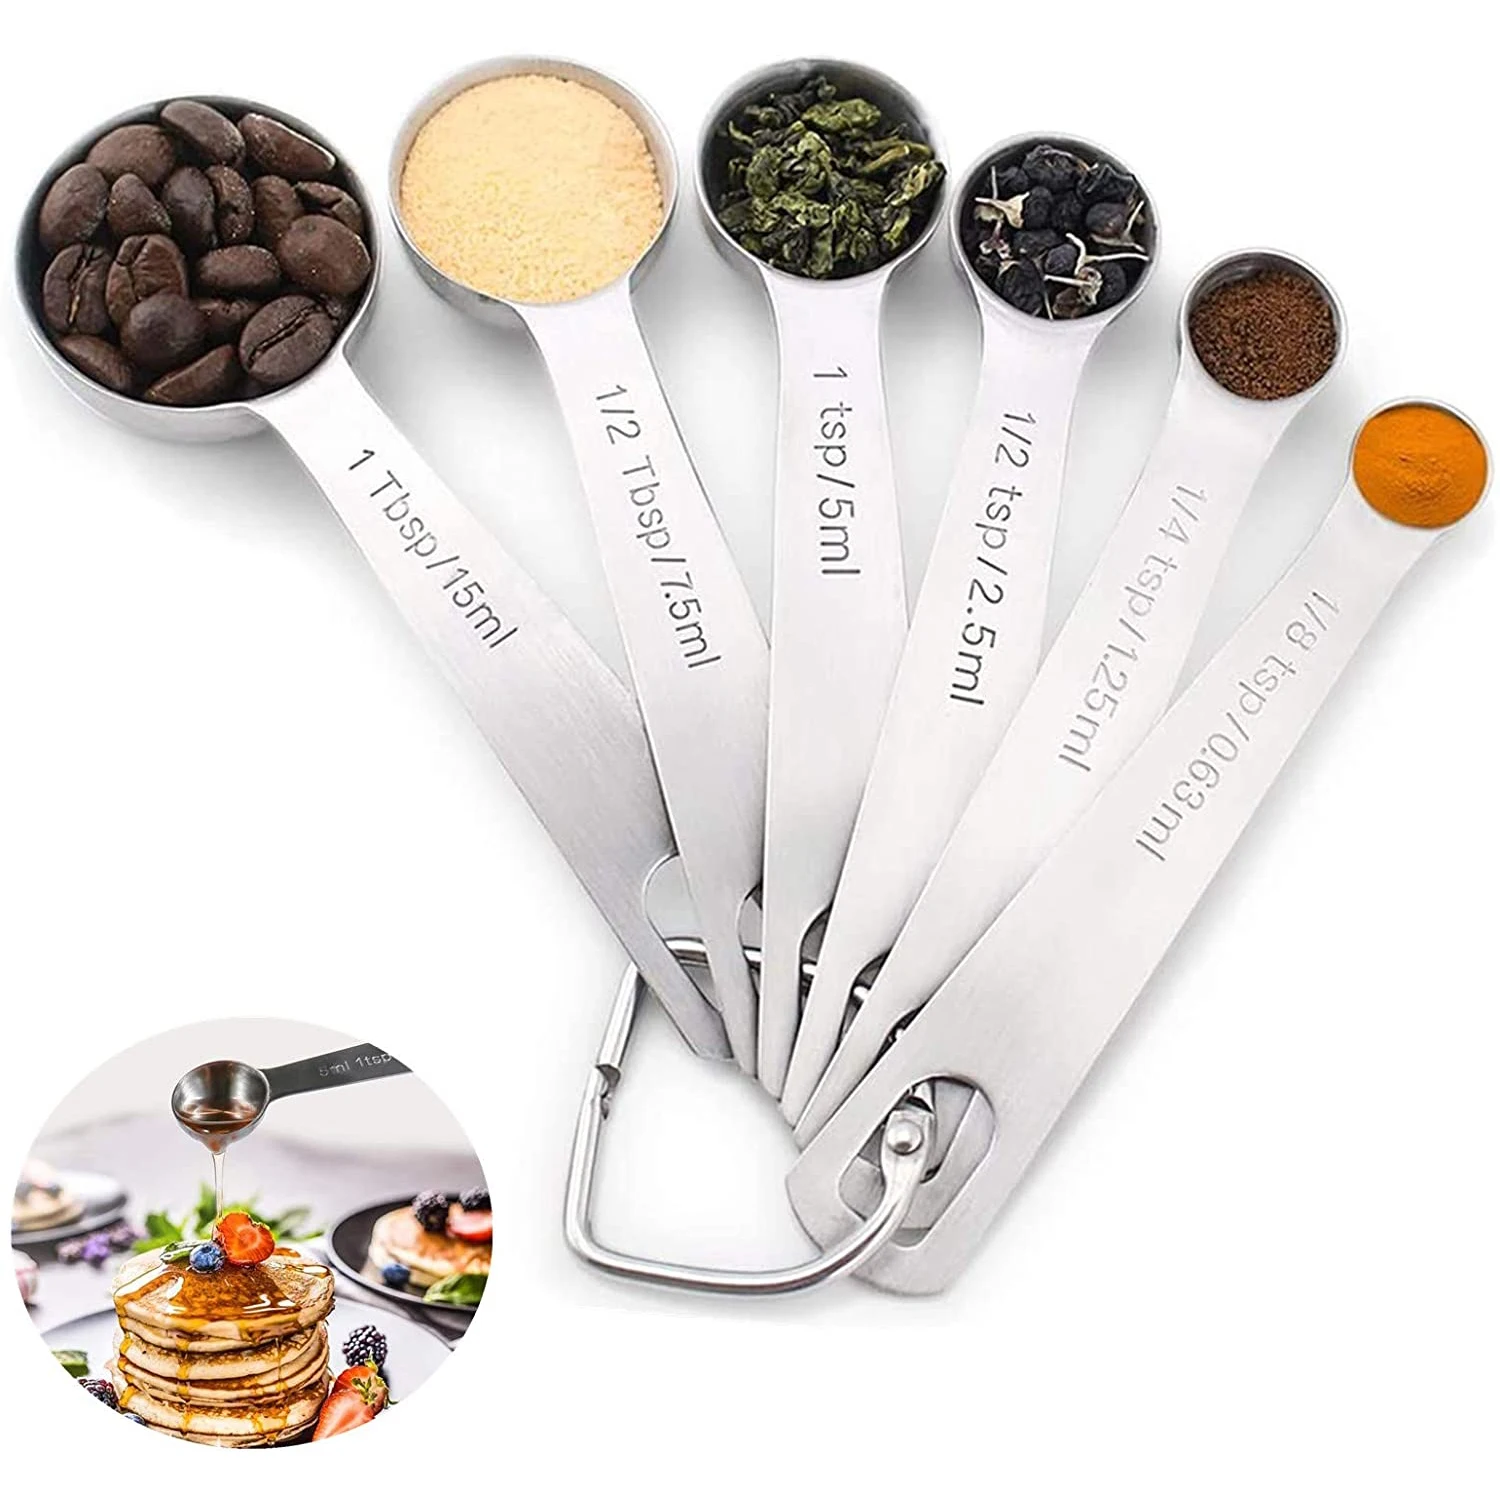 

Stainless Steel Adjustable Digital Mini Thick 6 Pieces Set Stackable Kitchen Baking Tools Tea And Coffee Measuring Spoons, Silver, rose gold, customizable